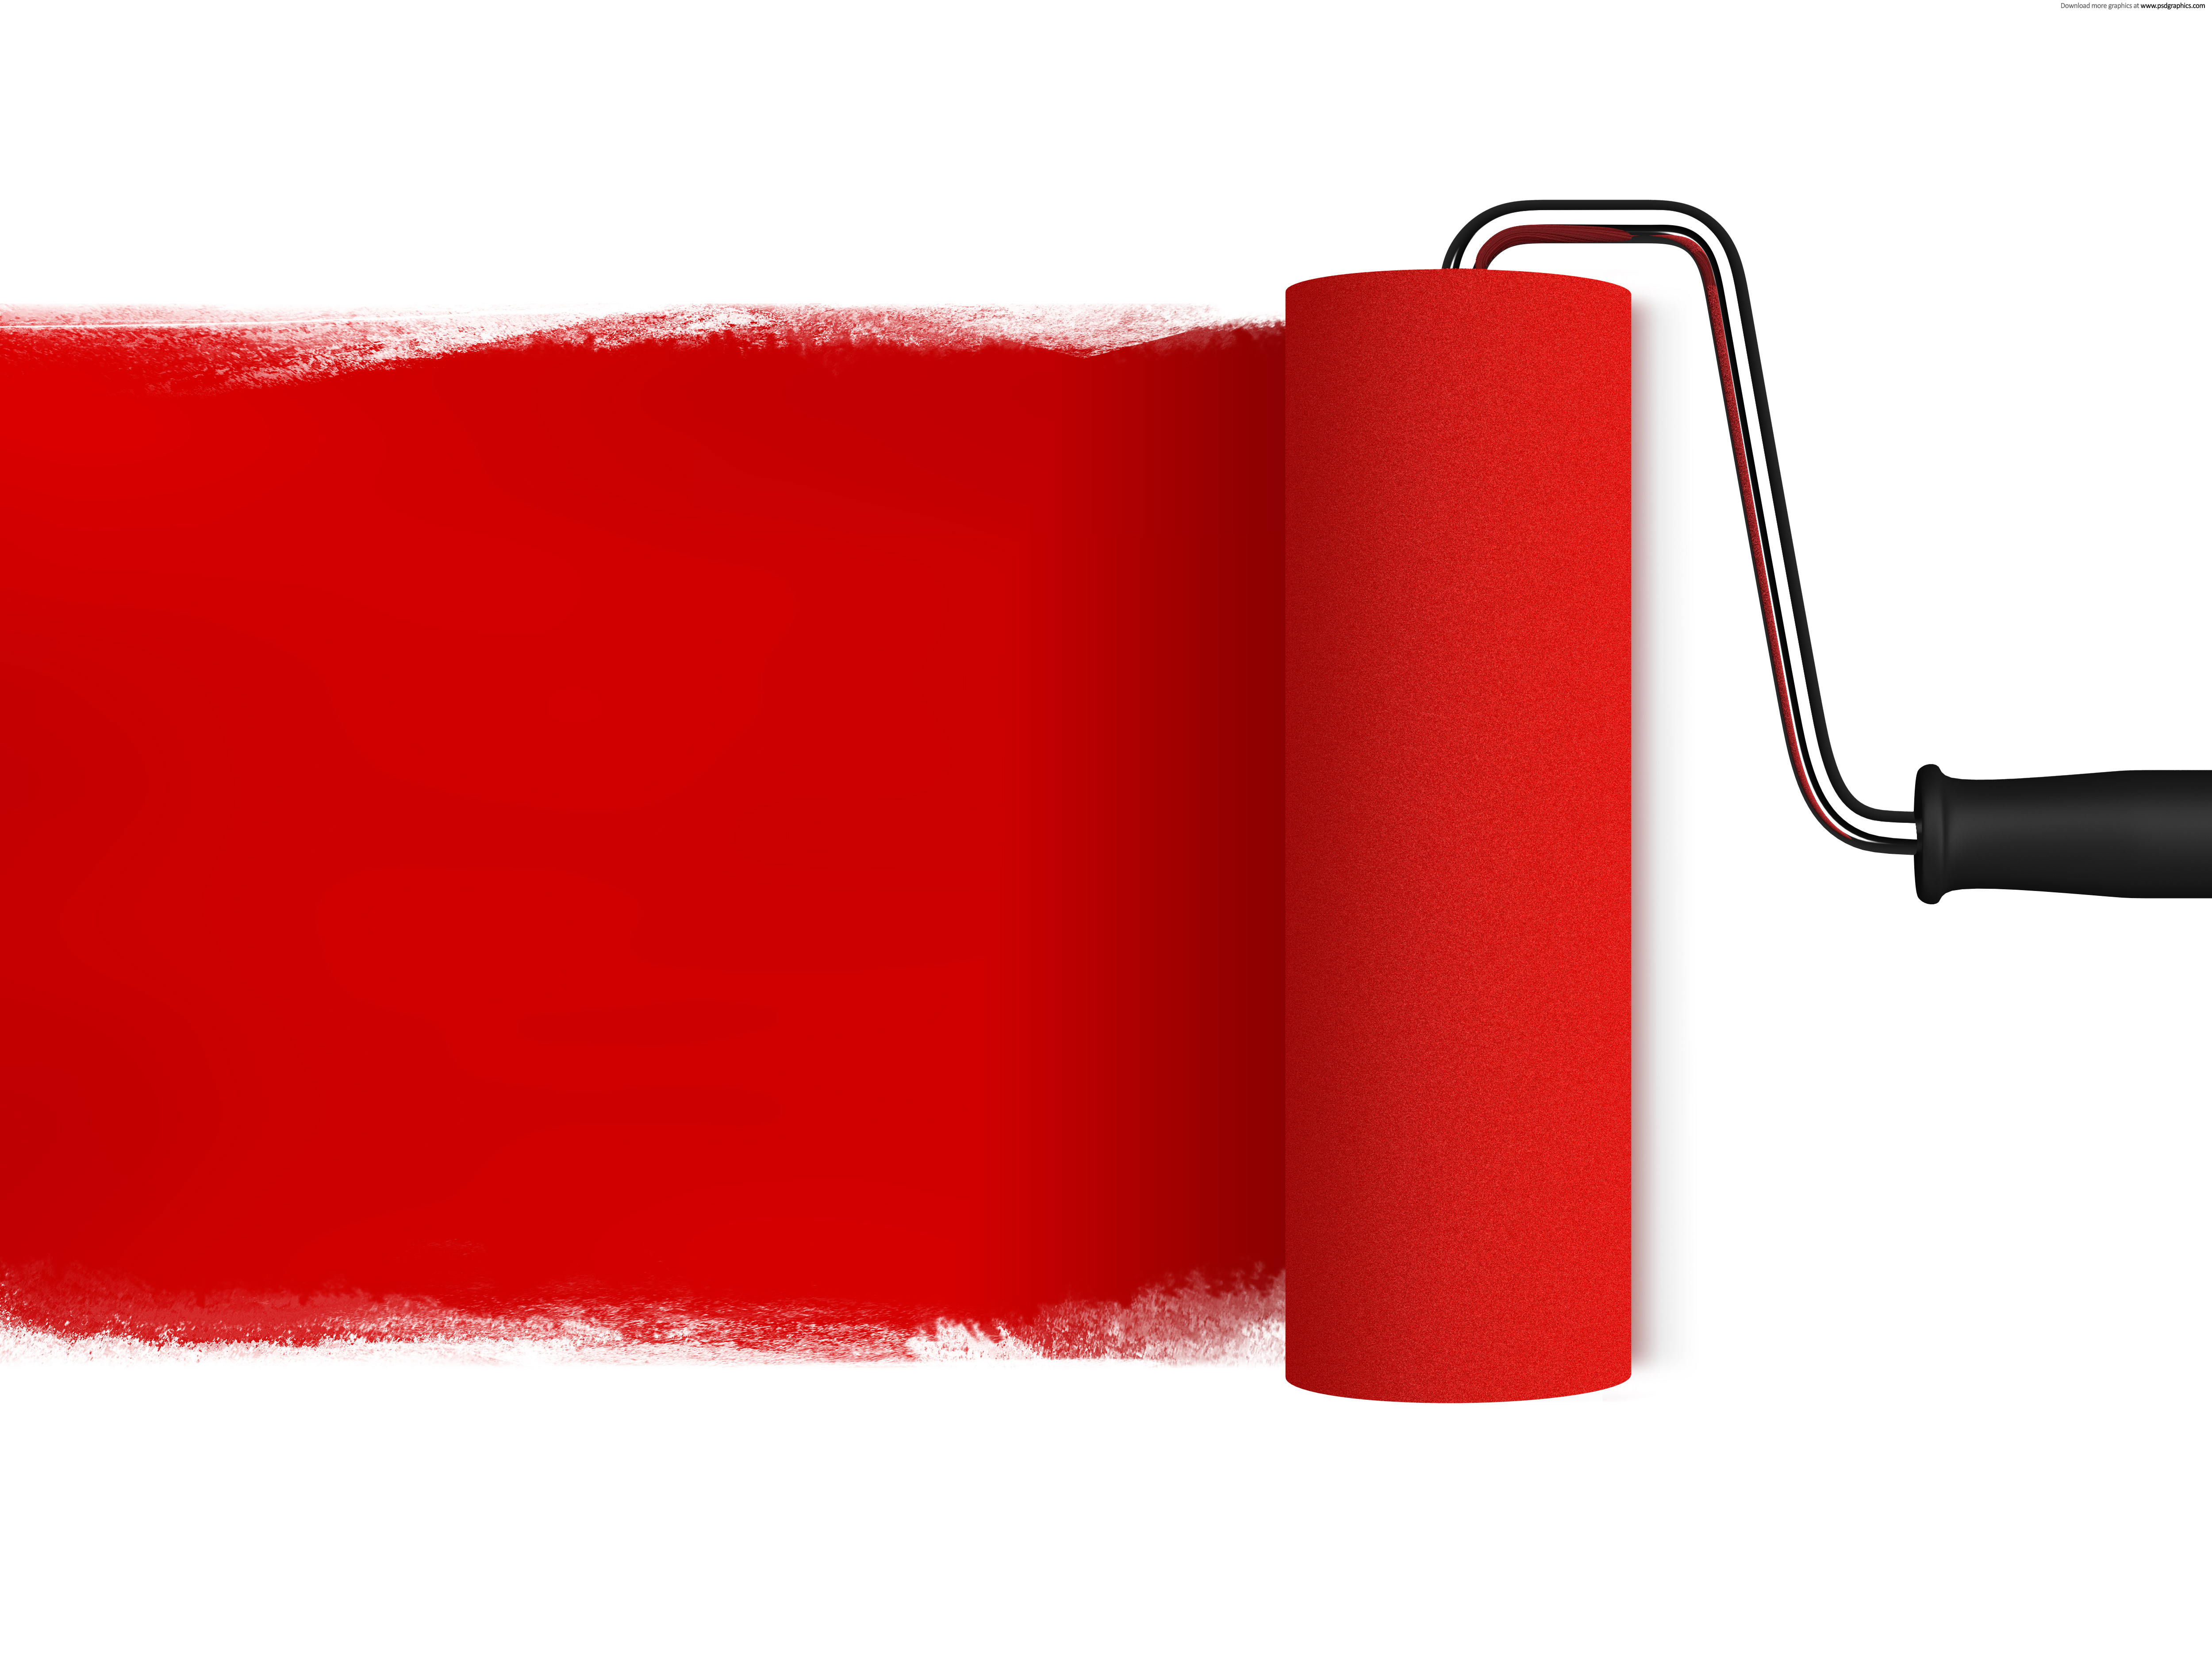 Red paint roller | PSDGraphics